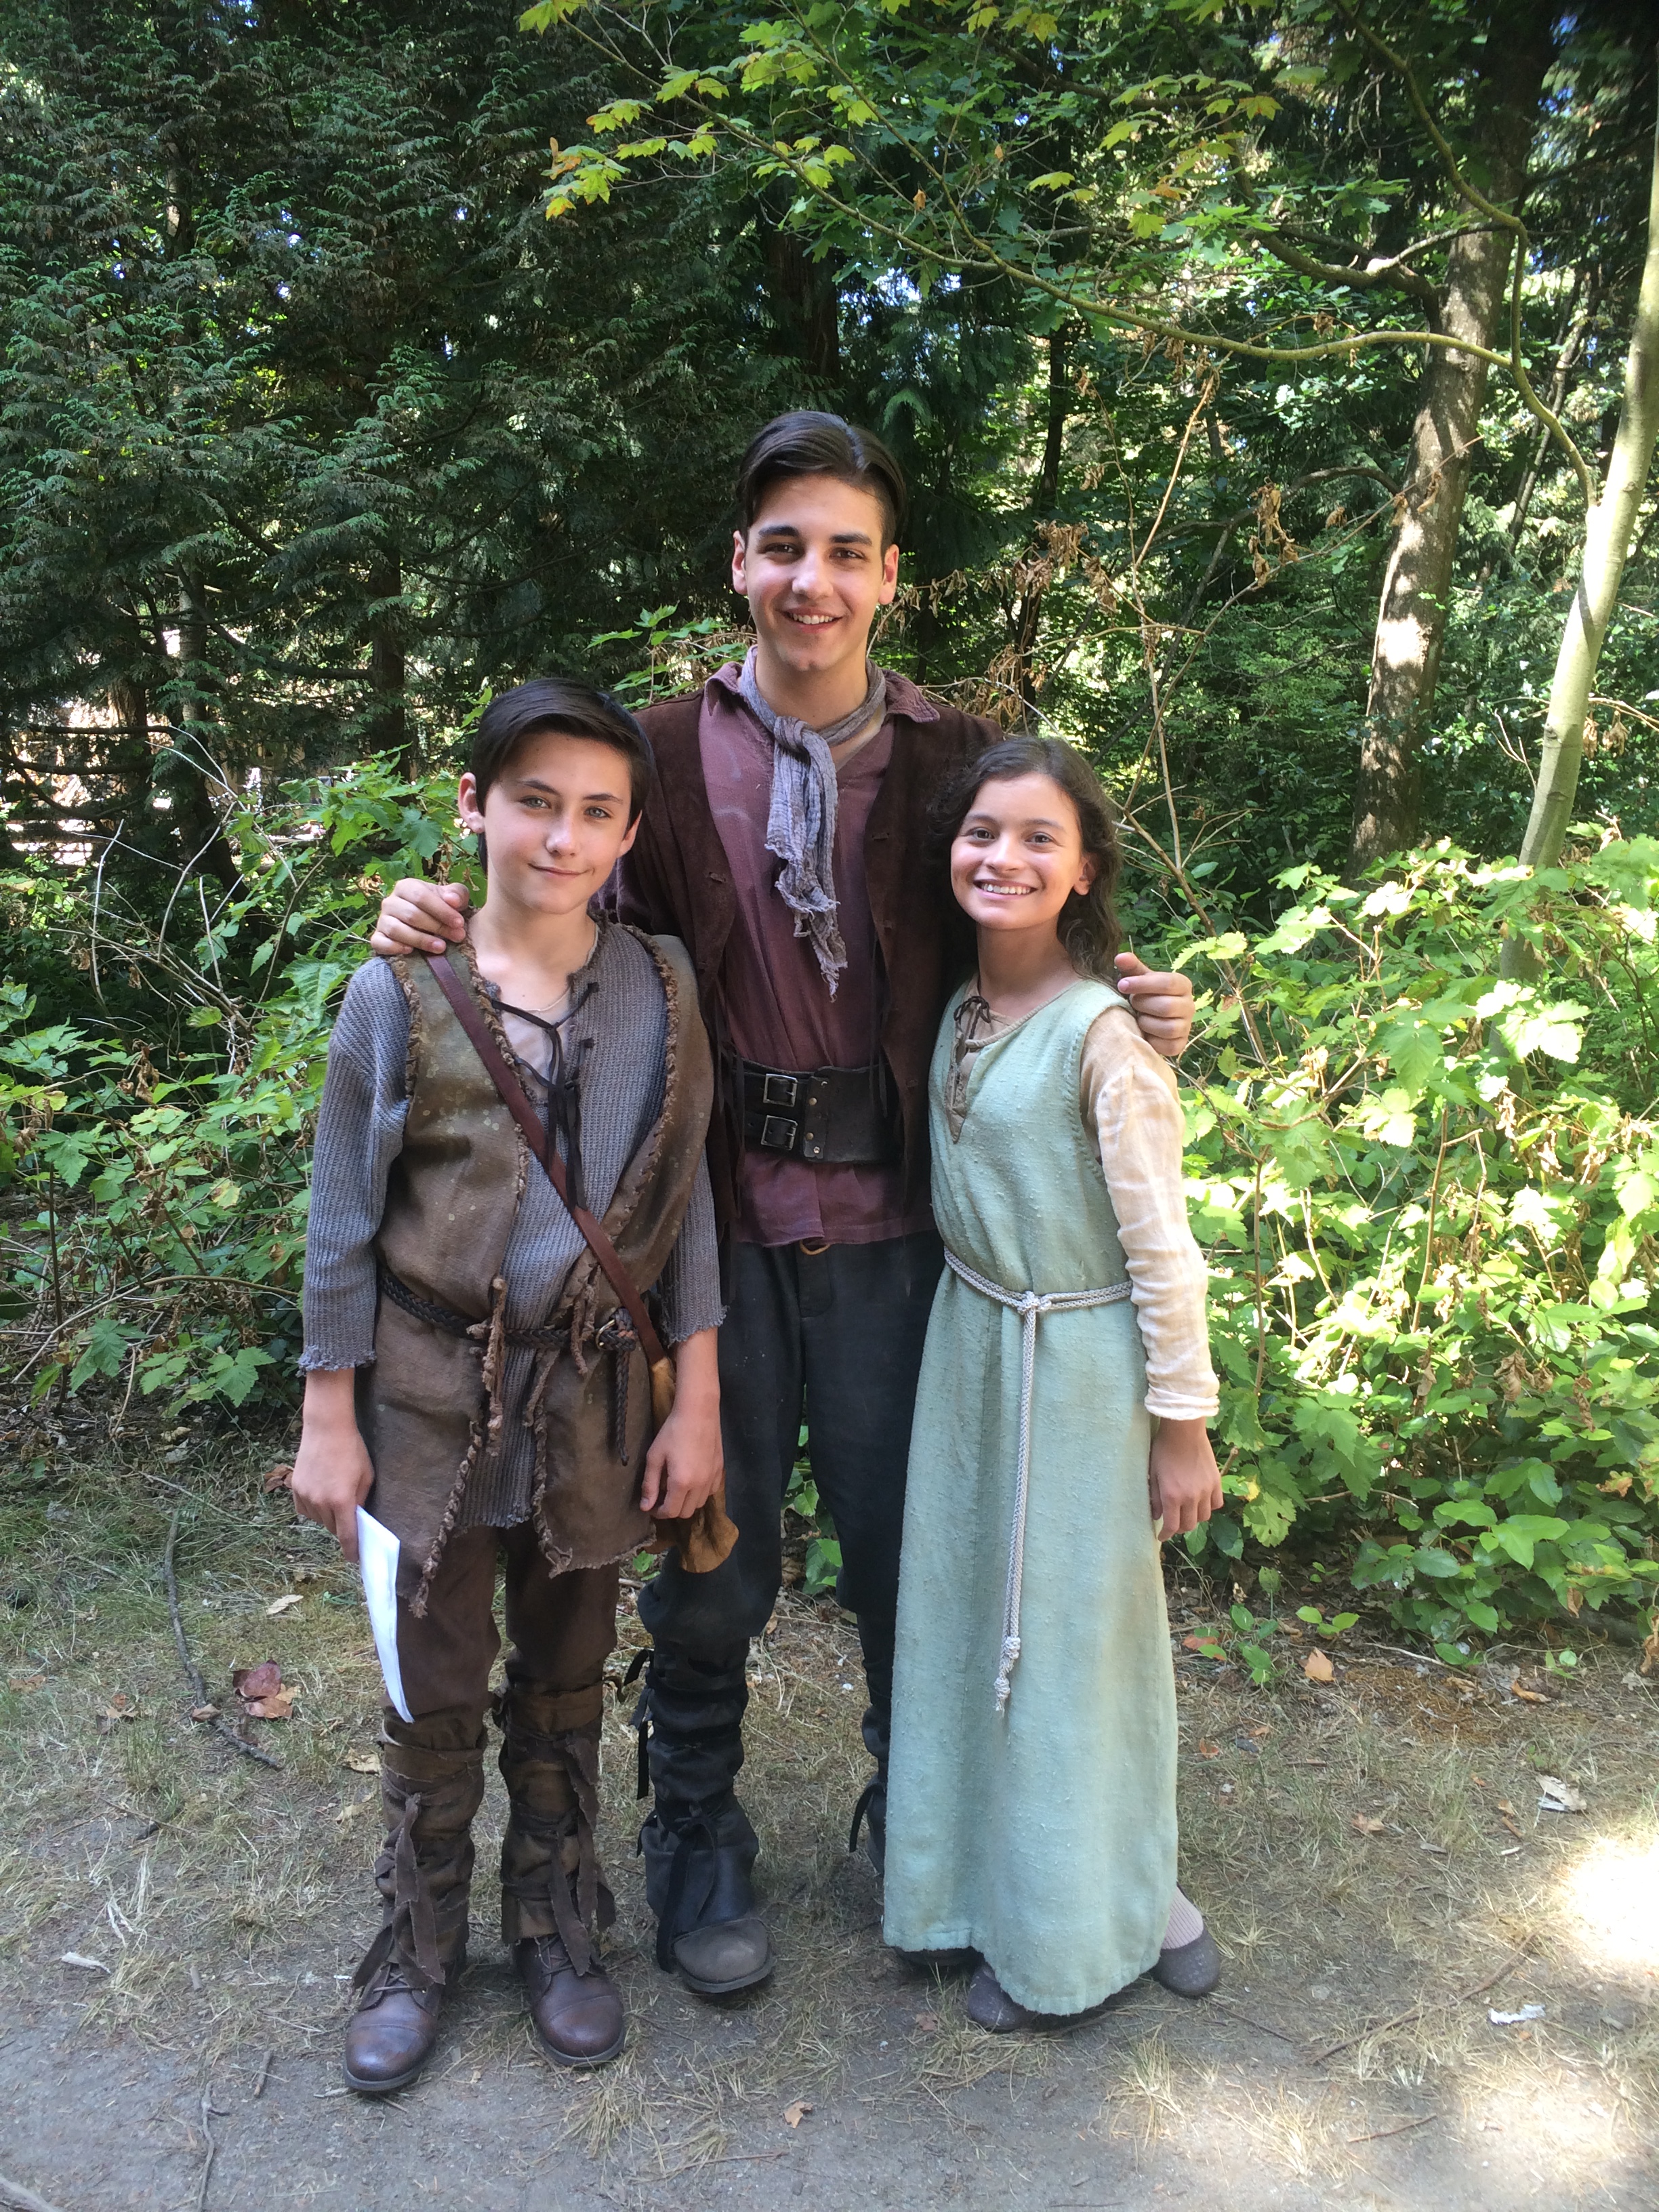 On set of Once Upon A Time